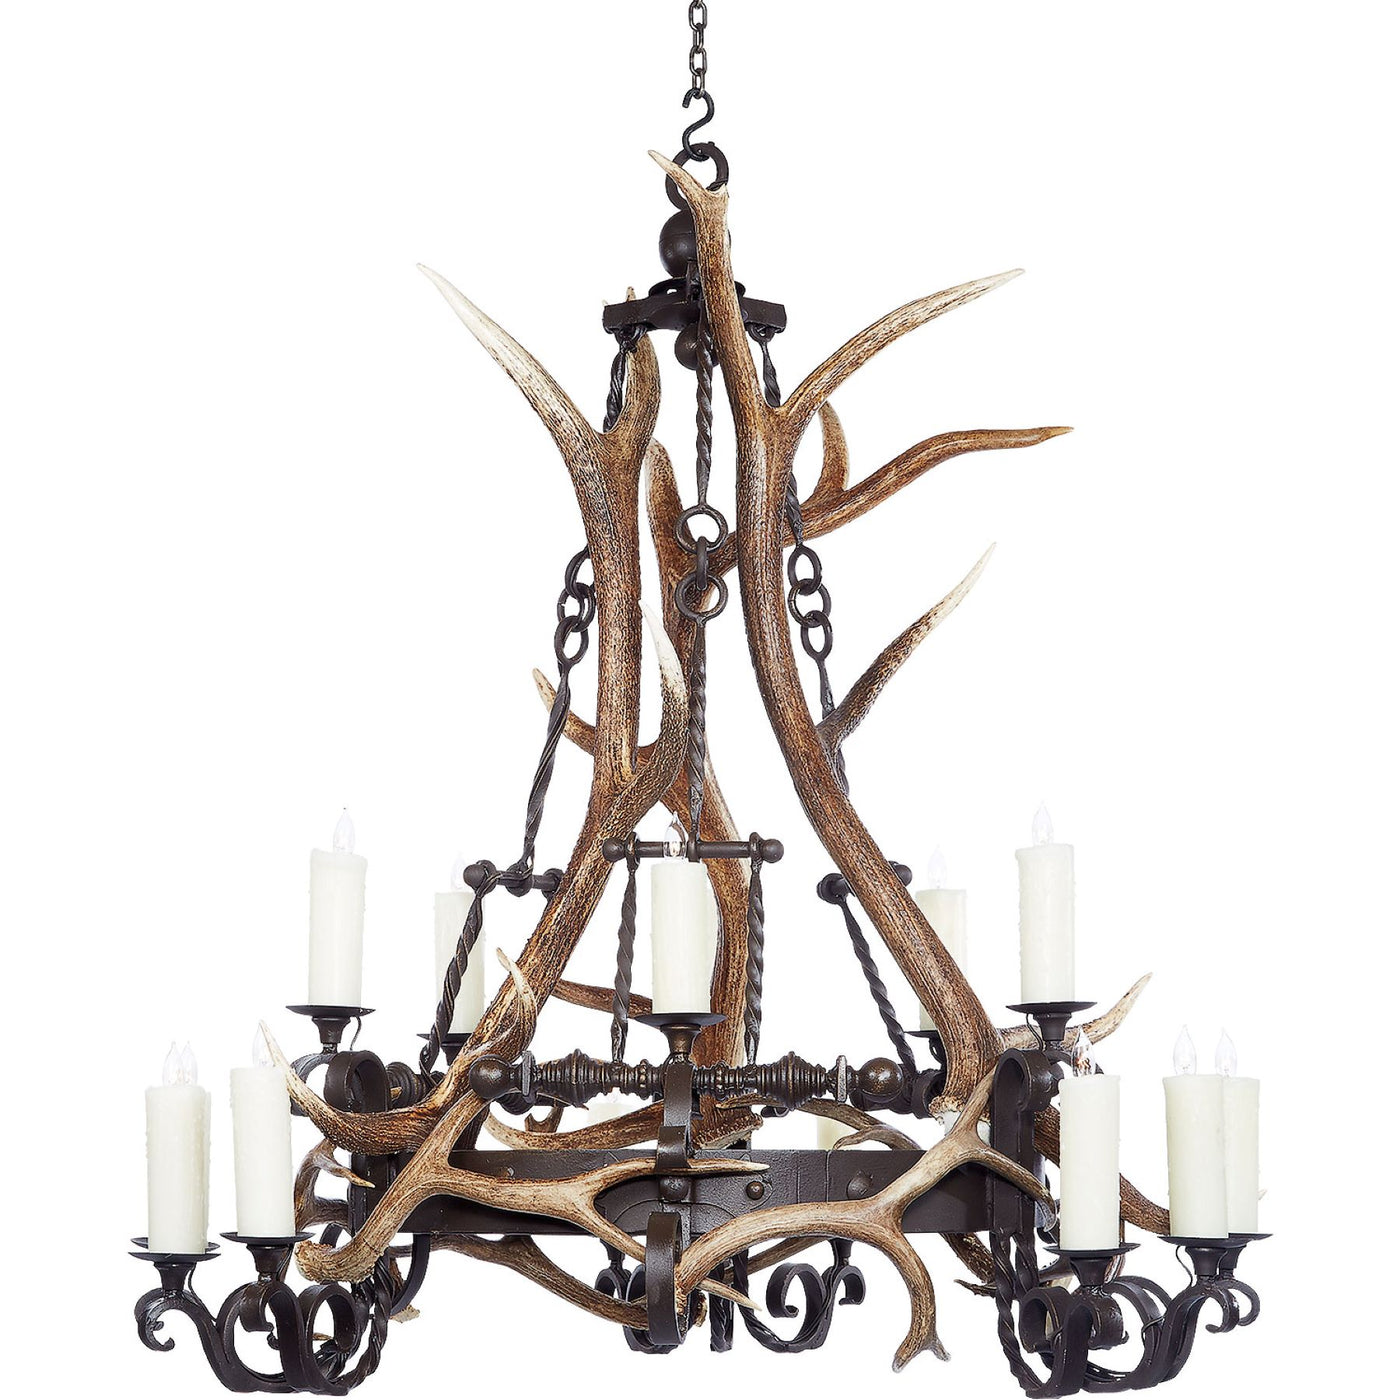 Leslie Chandelier with Antlers